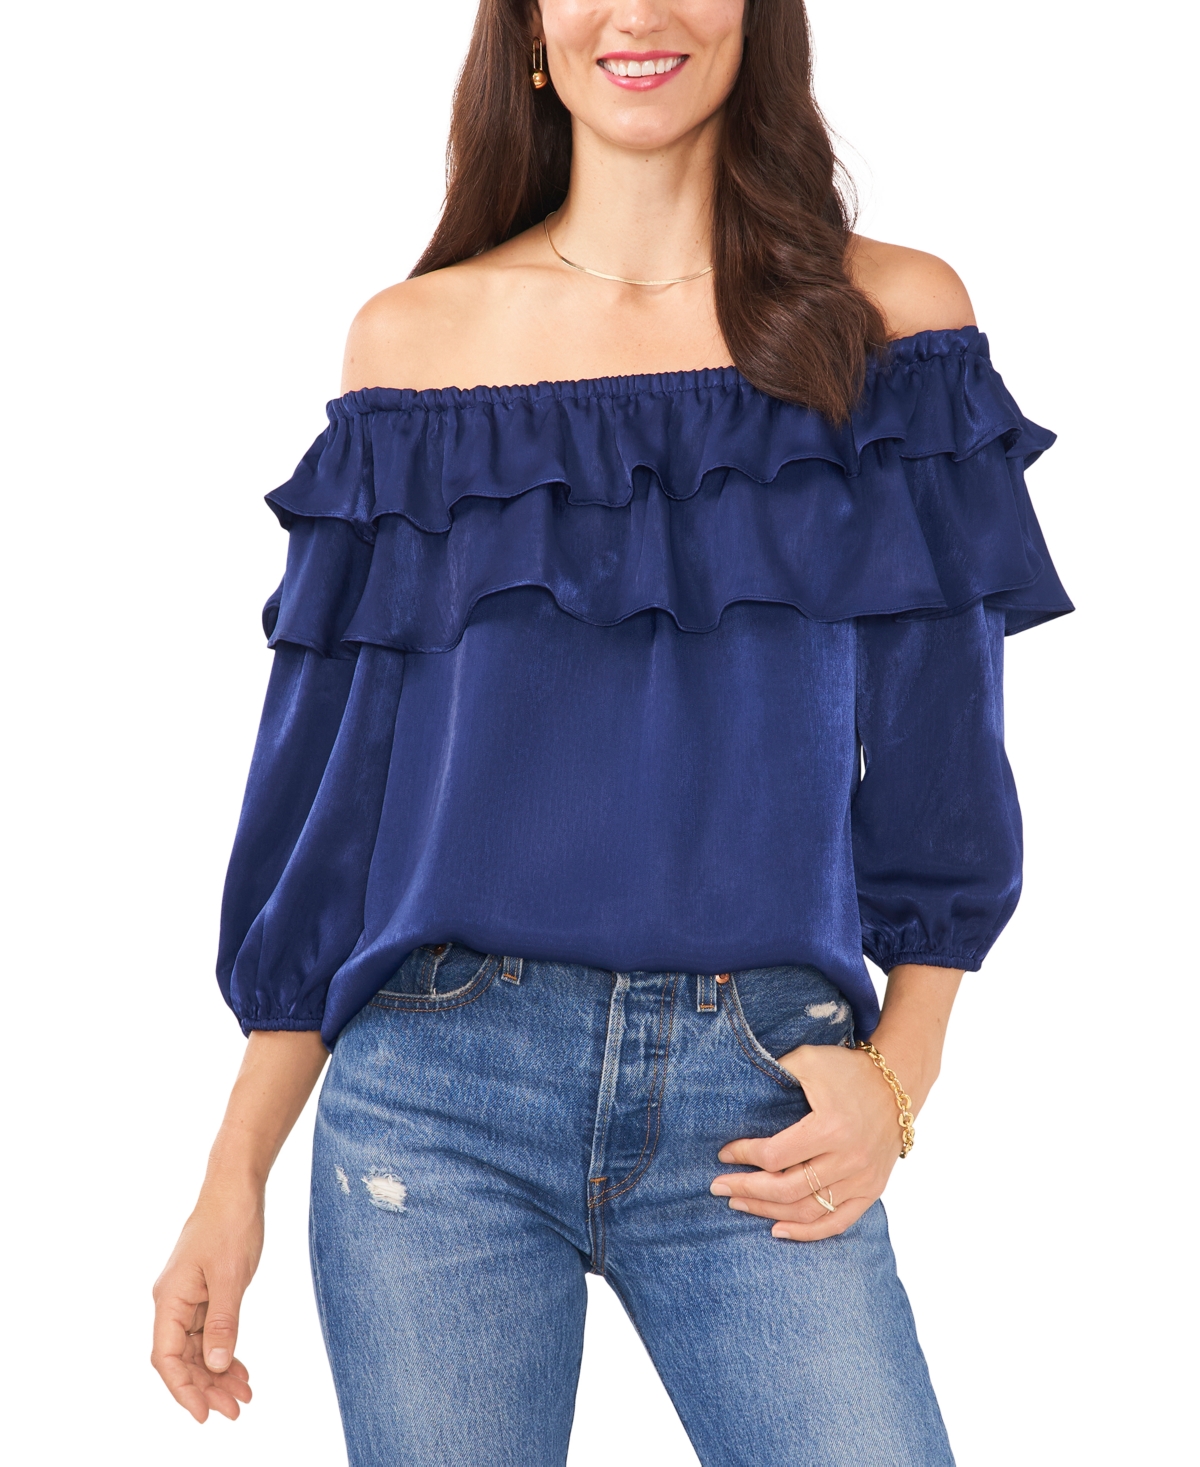 Vince Camuto Women's Ruffled Off-The-Shoulder Blouse